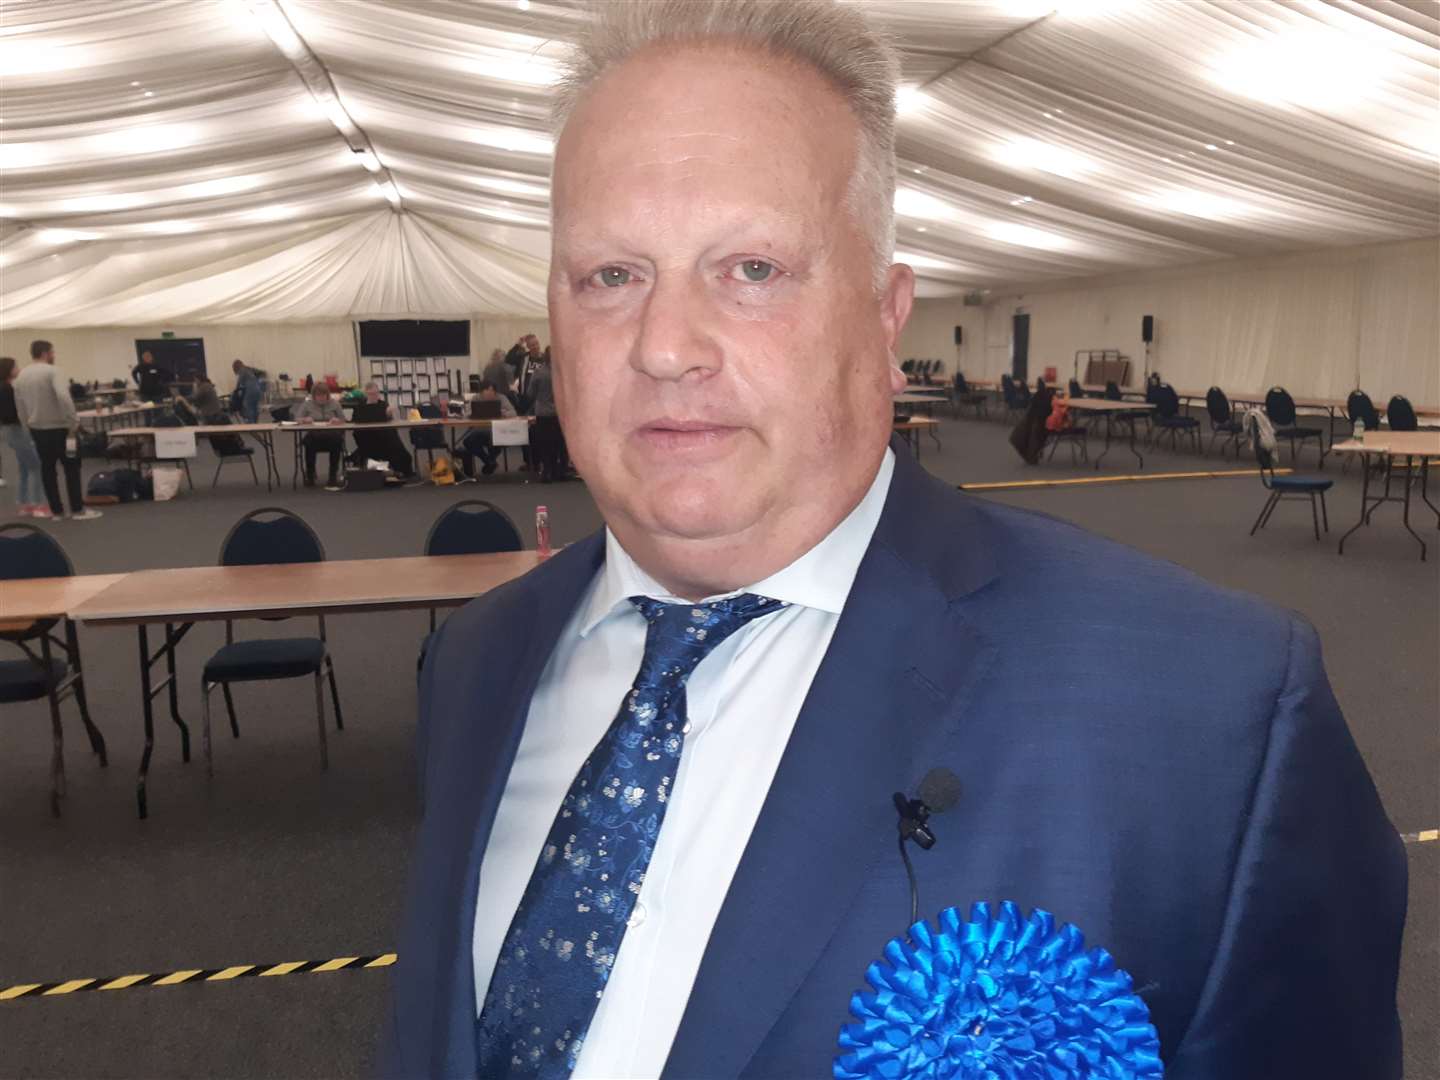 Cllr David Burton, Conservative party leader: We've bucked the trend